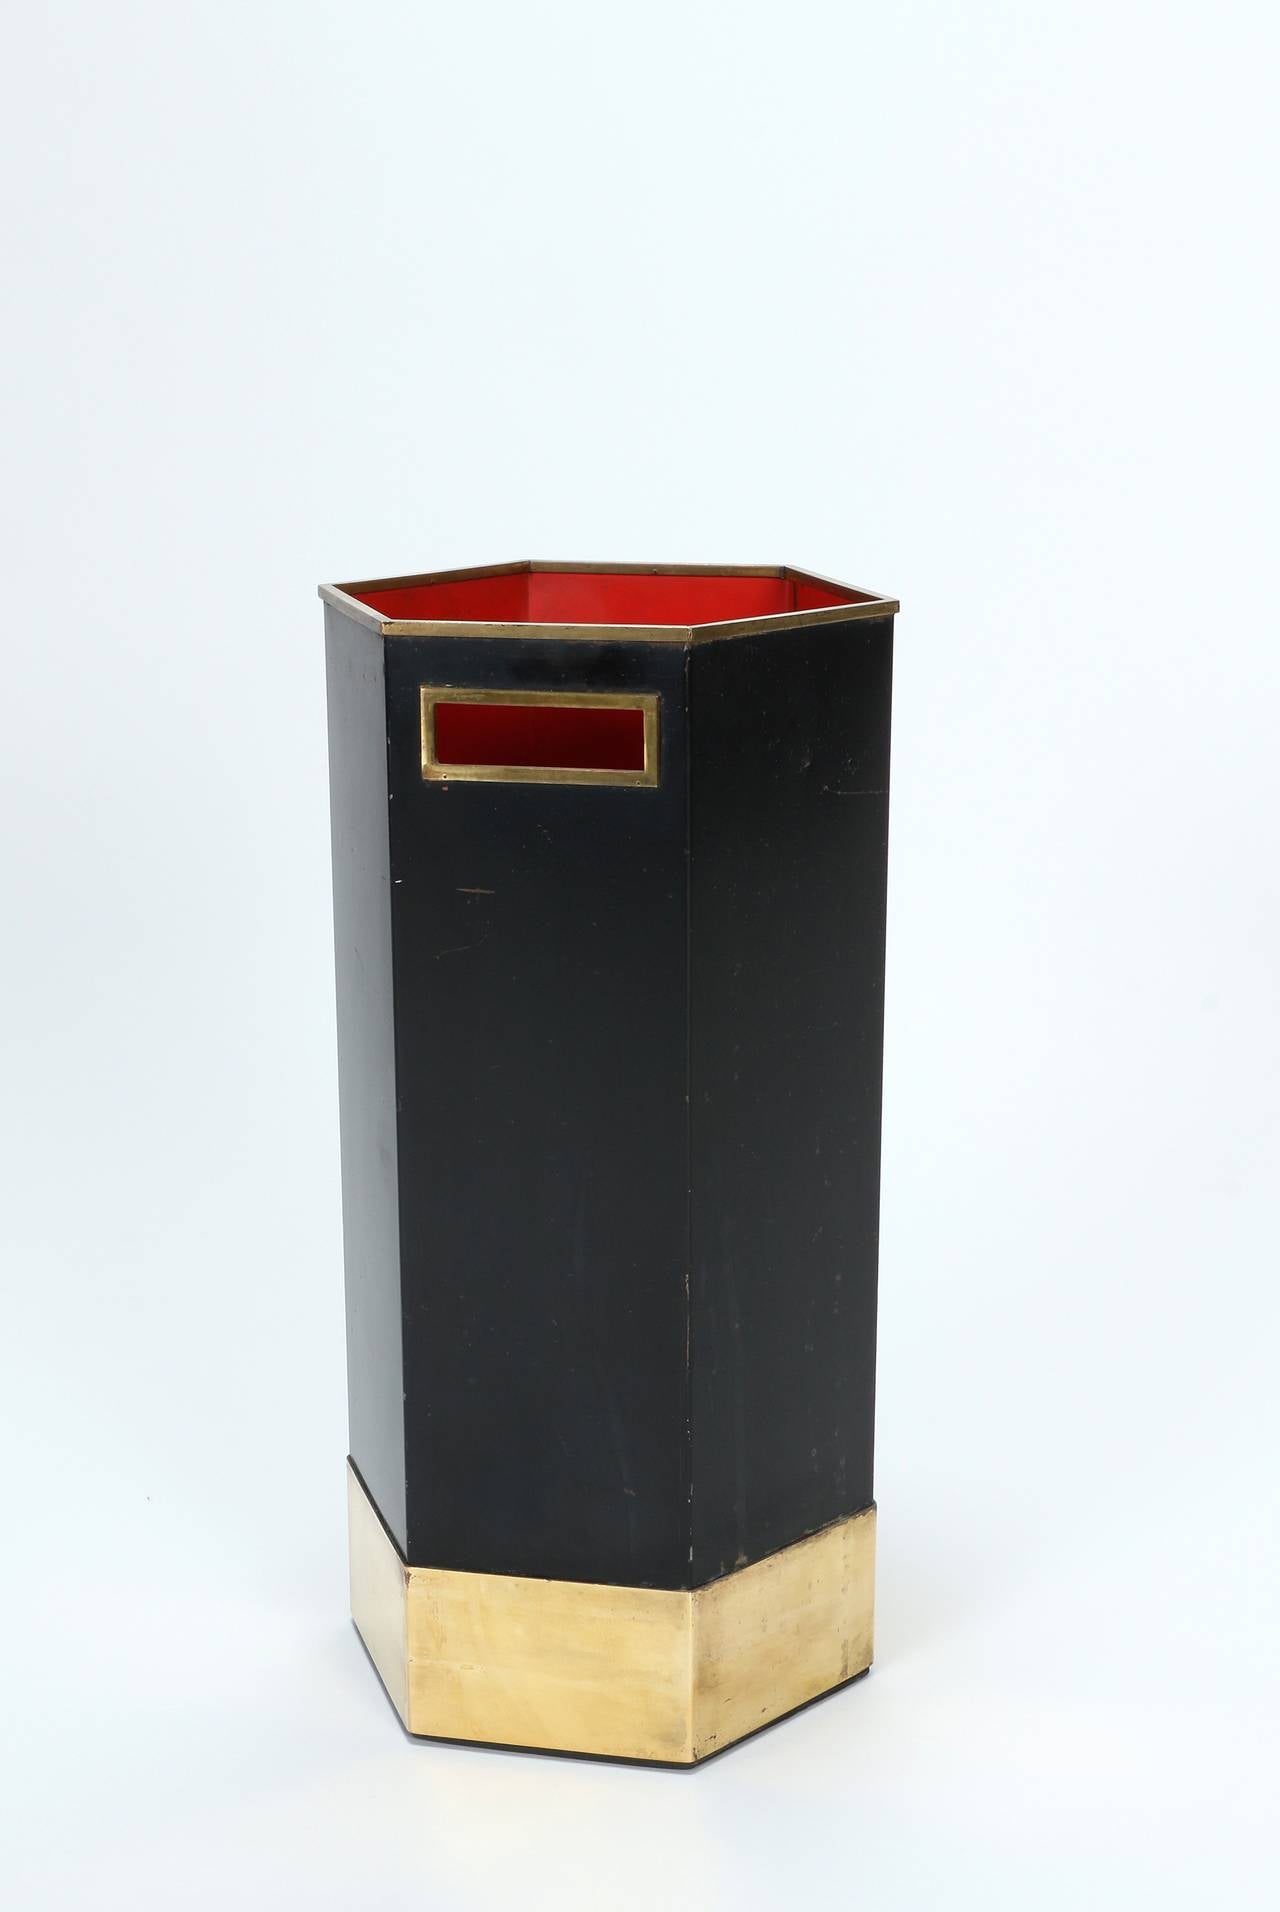 Very unique and rare Italian umbrella stand by Velca Legnano, Italy, 1950s. Stunning red interior, solid brass parts! High quality workmanship, stamped with Velca Legnano on bottom.